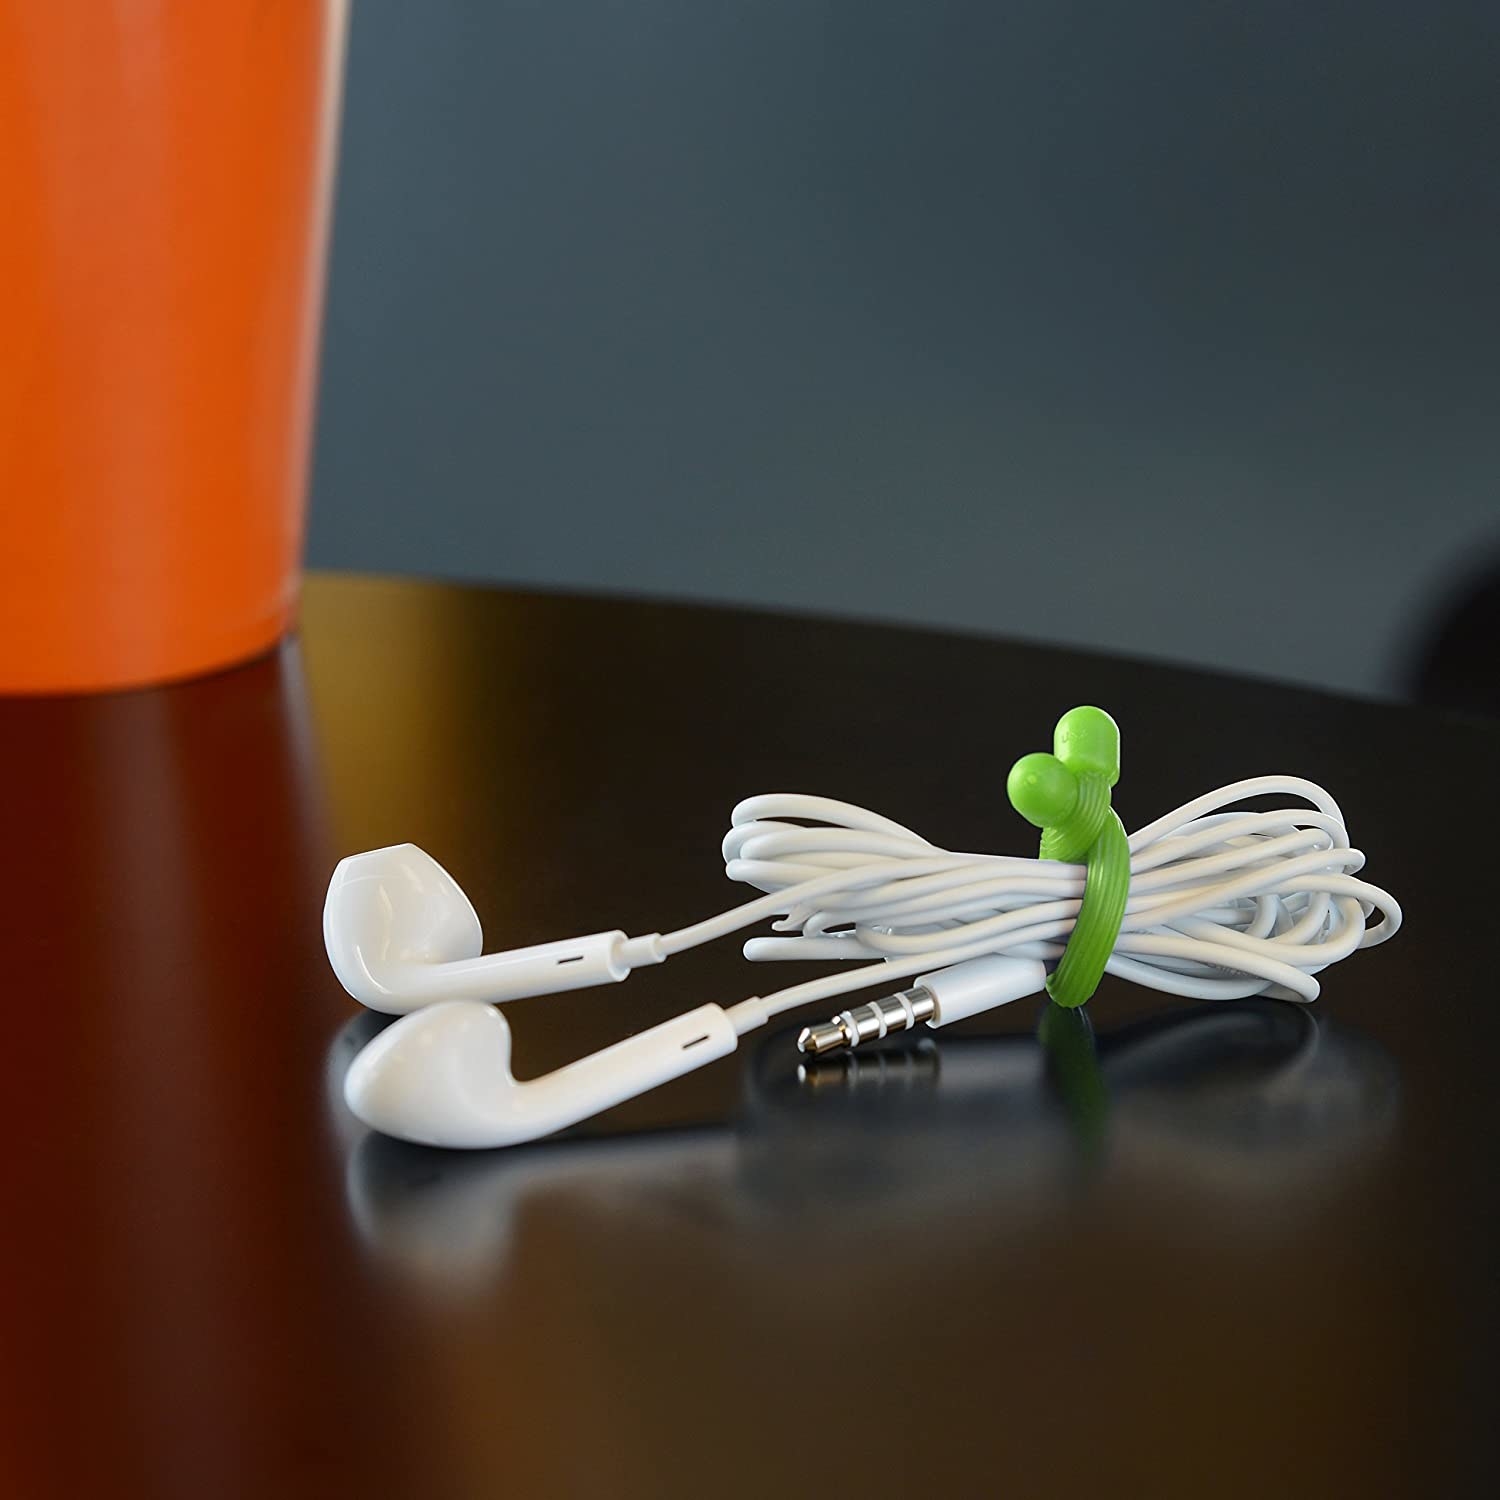 a pair of corded earbuds neatly wound up and held together with a reusable twist tie